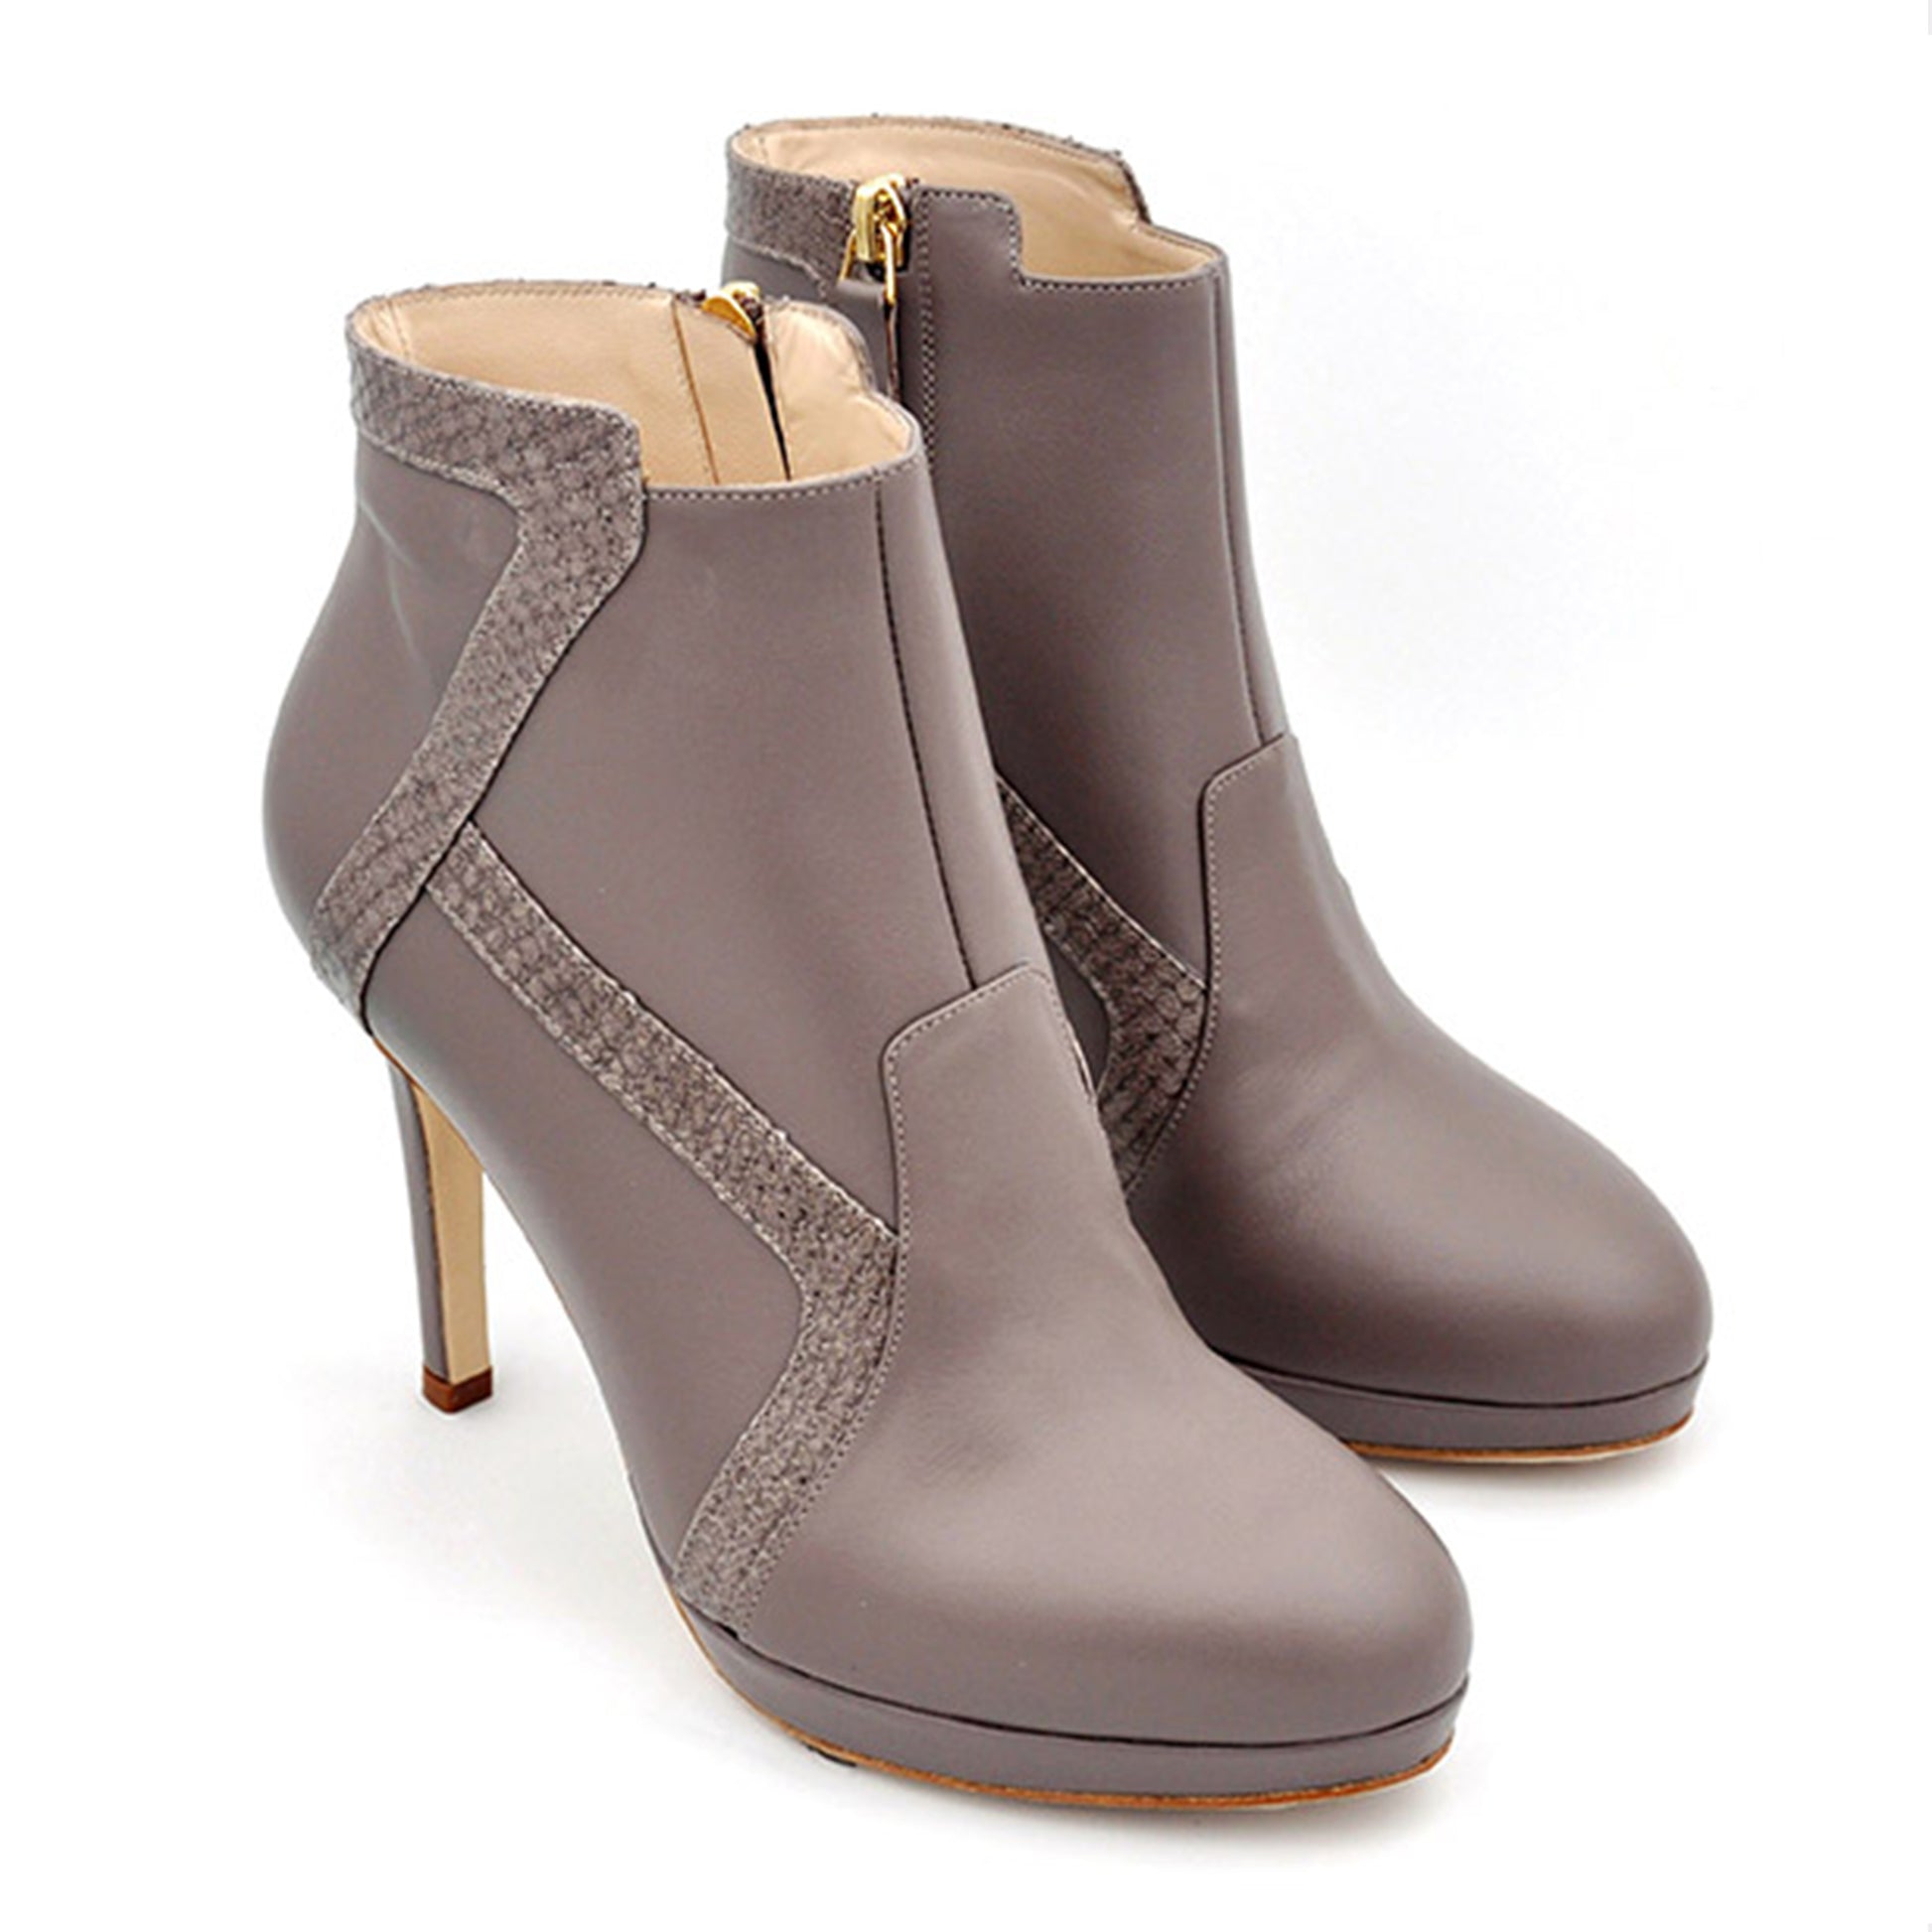 The Deia Bootie - Taupe Python Leather High Heel Boots